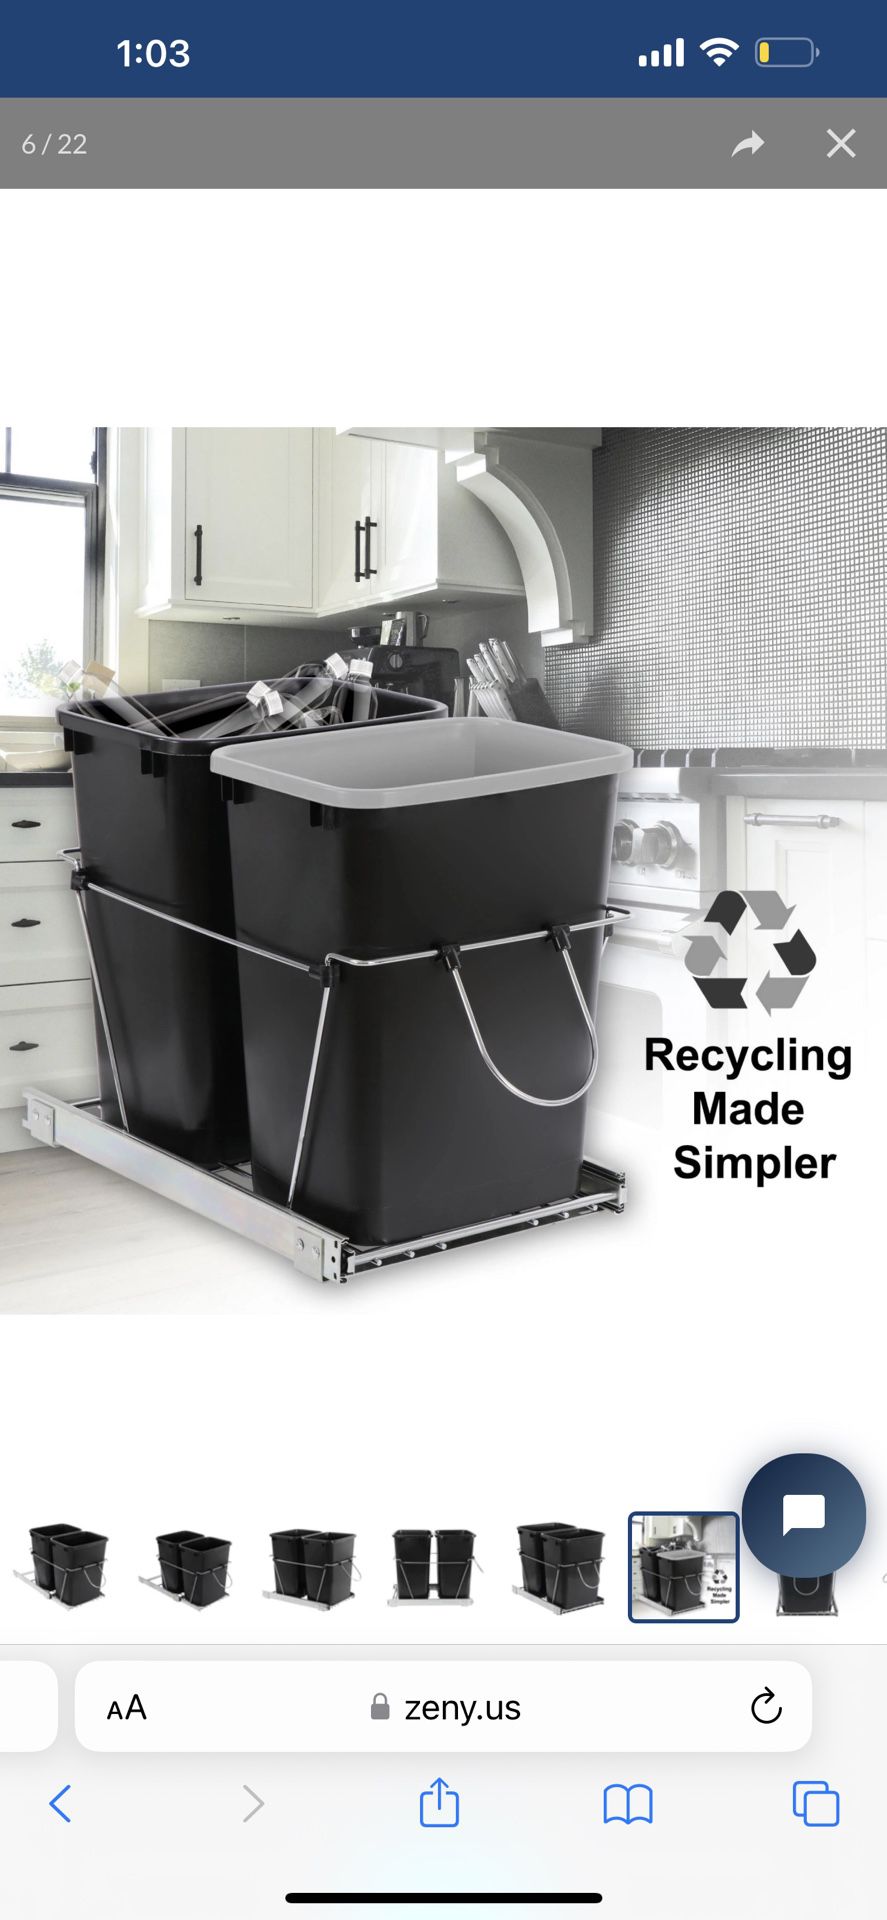 Cabinet Sliding Waste Bin for Kitchen Duo Pull-Out Recycle Cans Easy Access no show trash container